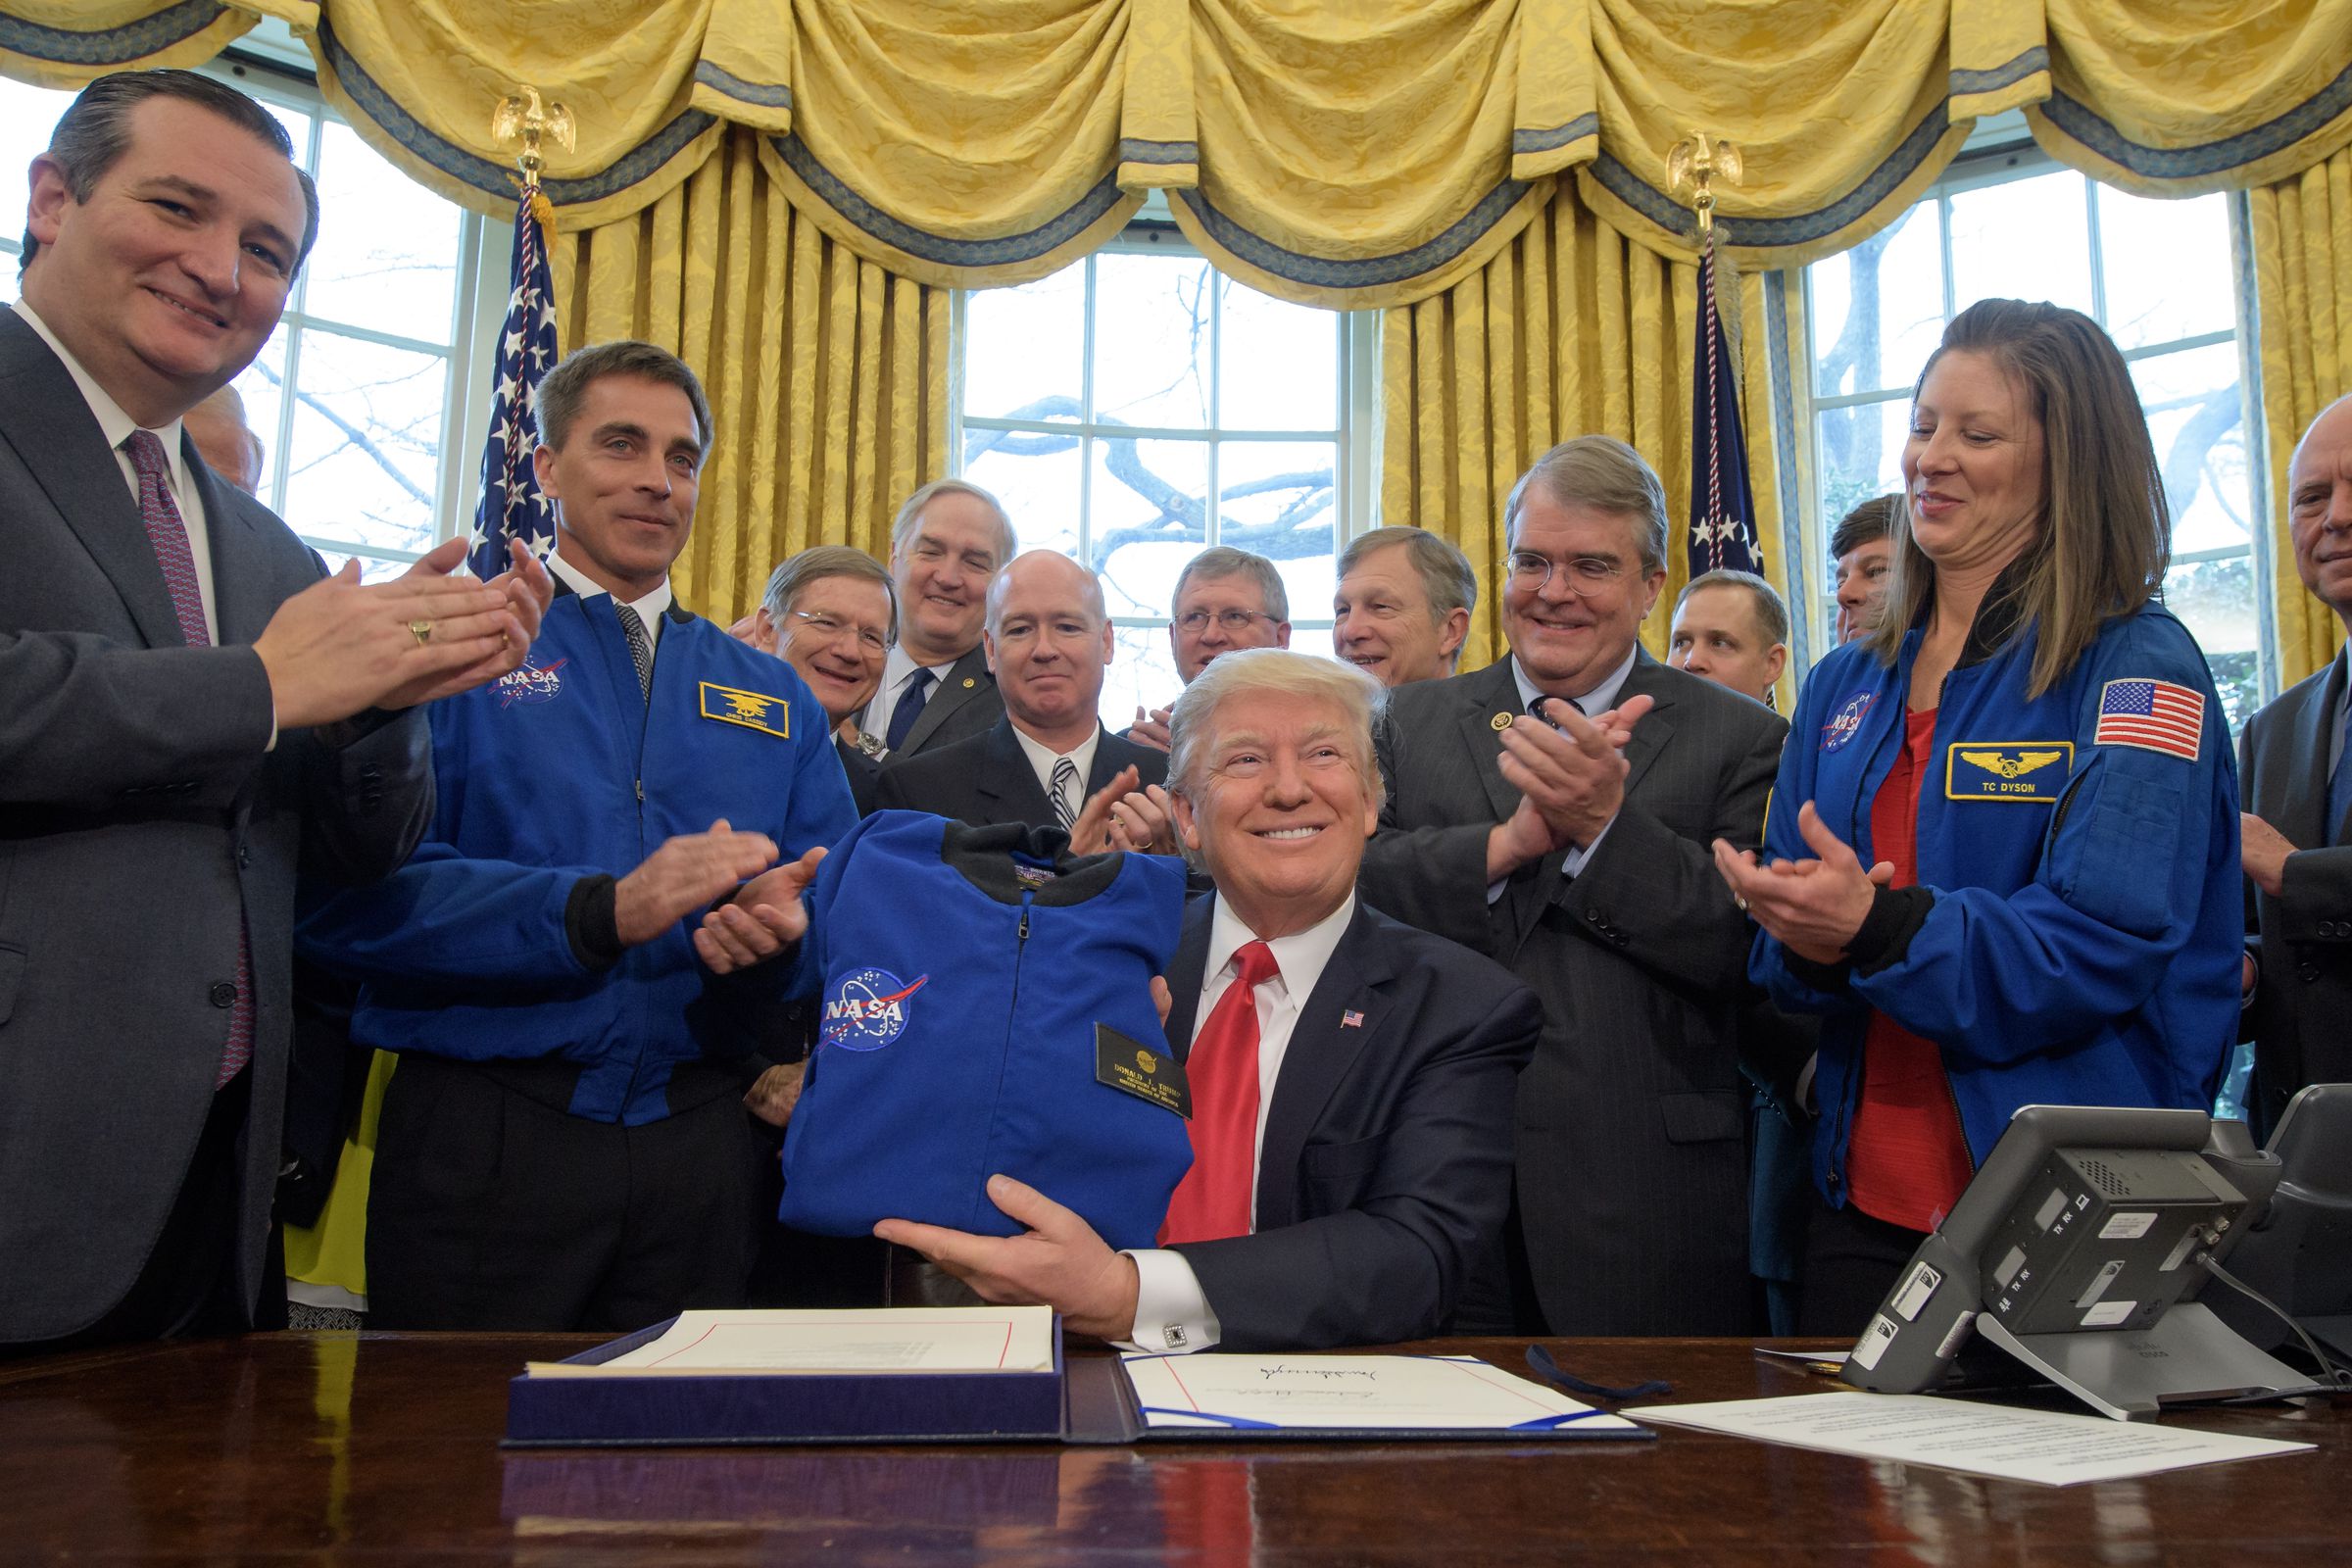 President Trump received a NASA flight jacket during today’s signing.